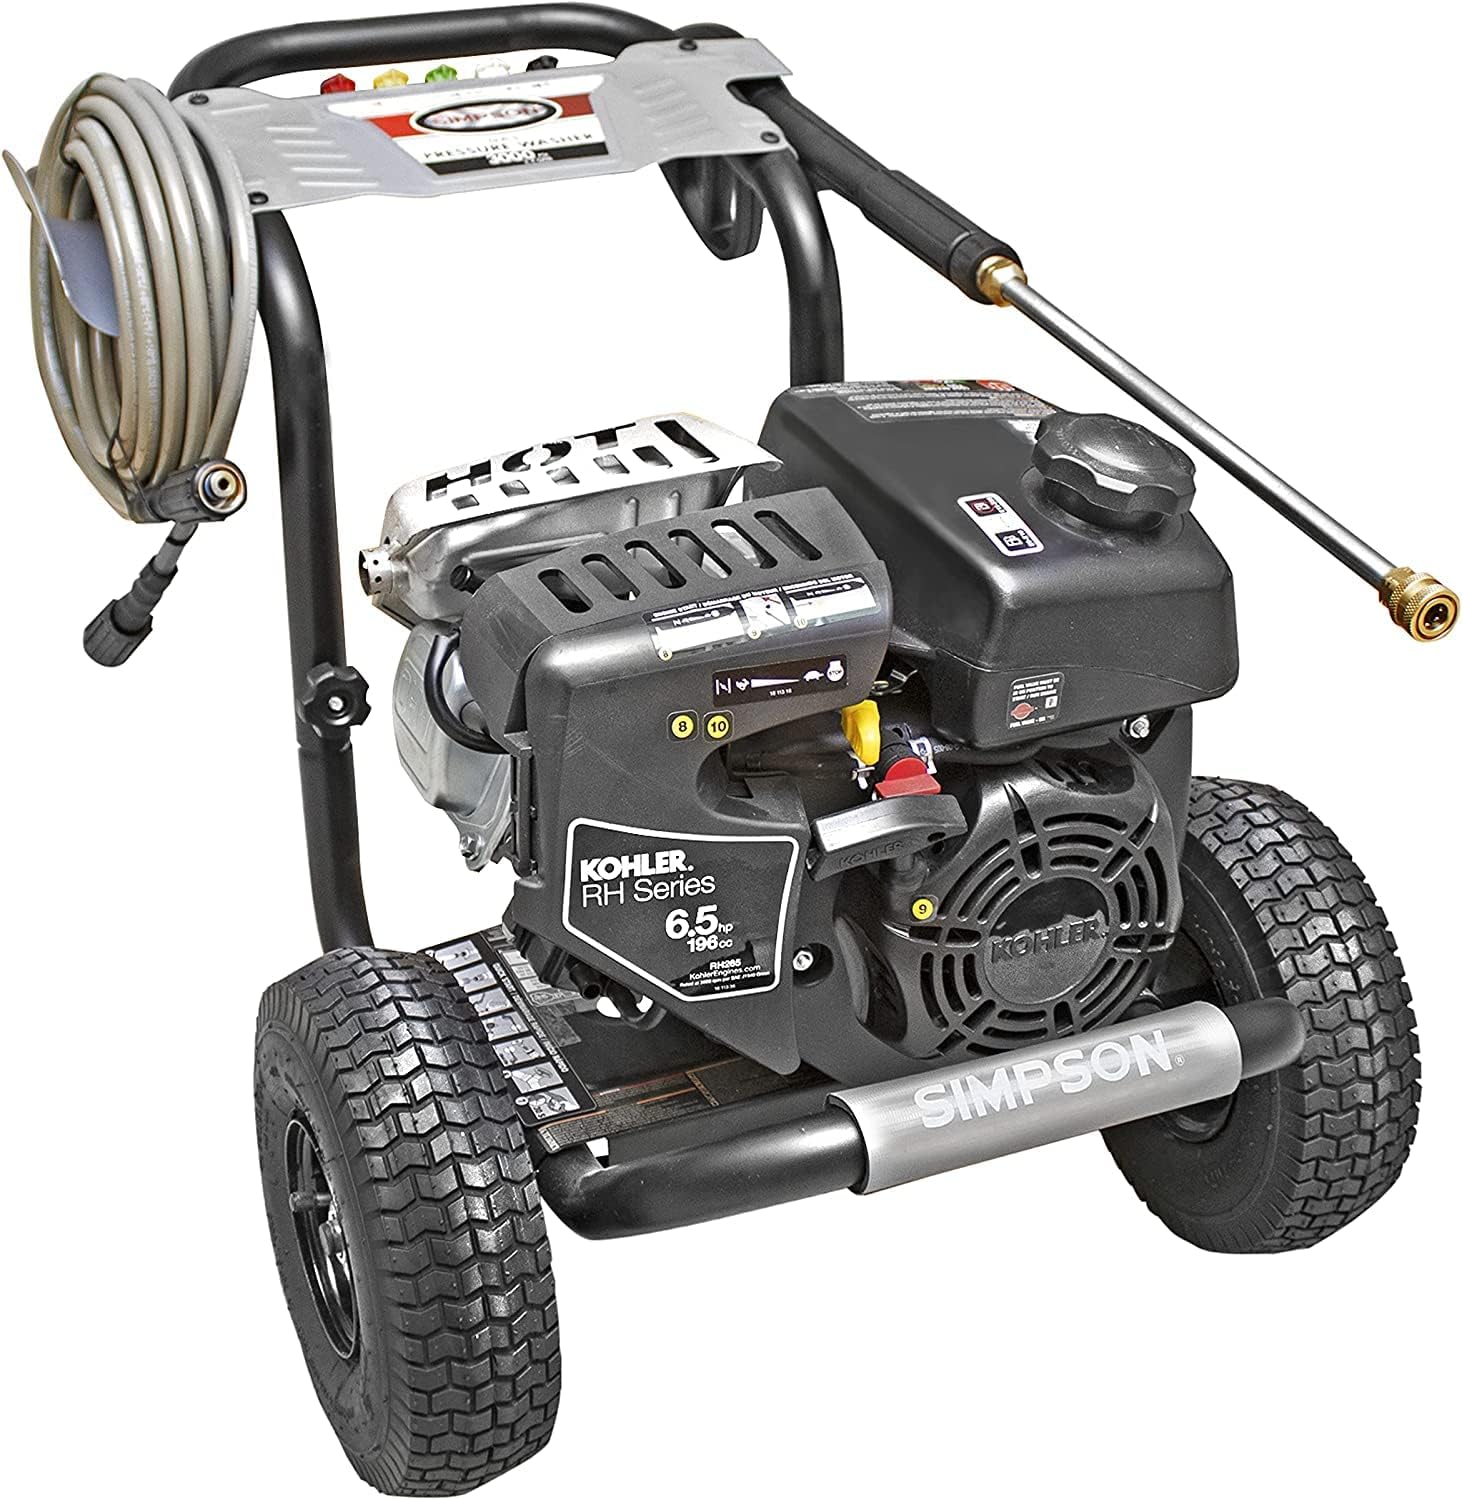 SIMPSON Cleaning MS60763-S MegaShot 3100 PSI Gas Pressure Washer, 2.4 GPM, Kohler RH265 Engine, Includes Spray Gun and Extension Wand, 5 QC Nozzle Tips, 1/4-in. x 25-ft. MorFlex Hose Pressure Washer 3100 PSI Honda RH265 (Refurbished)